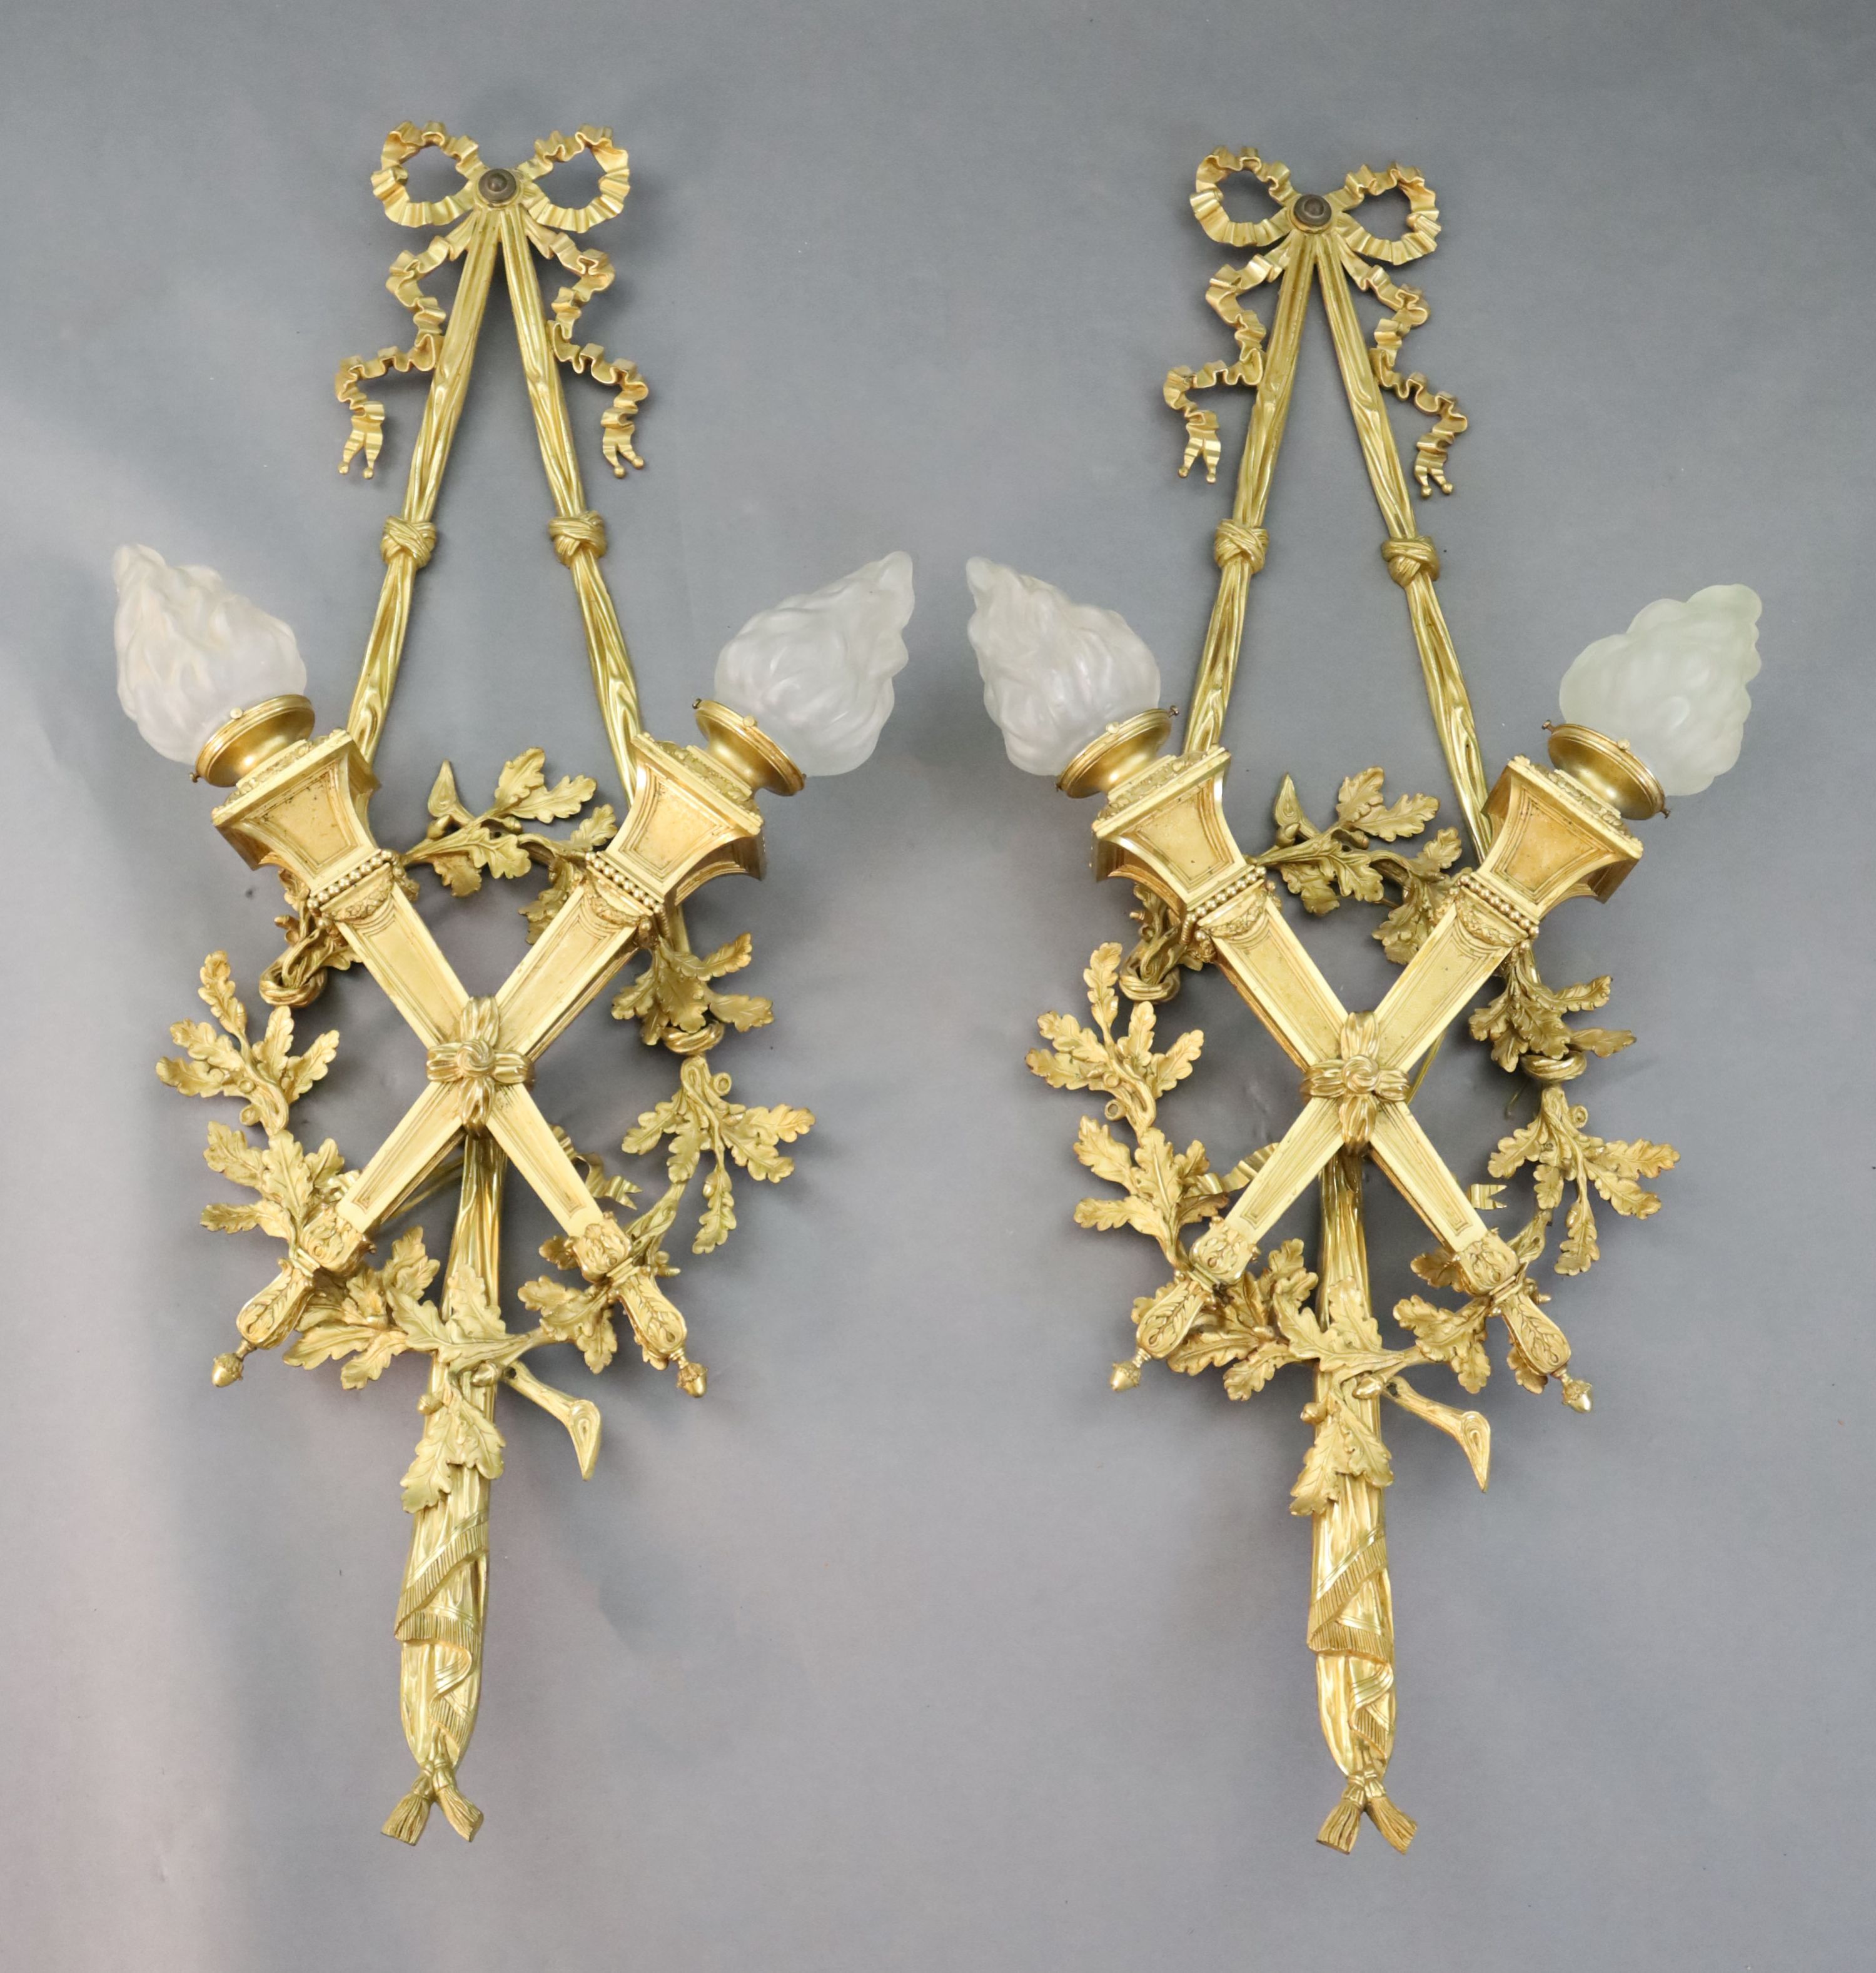 A pair of early 20th century Louis XVI style ormolu wall lights, width 1ft 10in. height 4ft 2in.